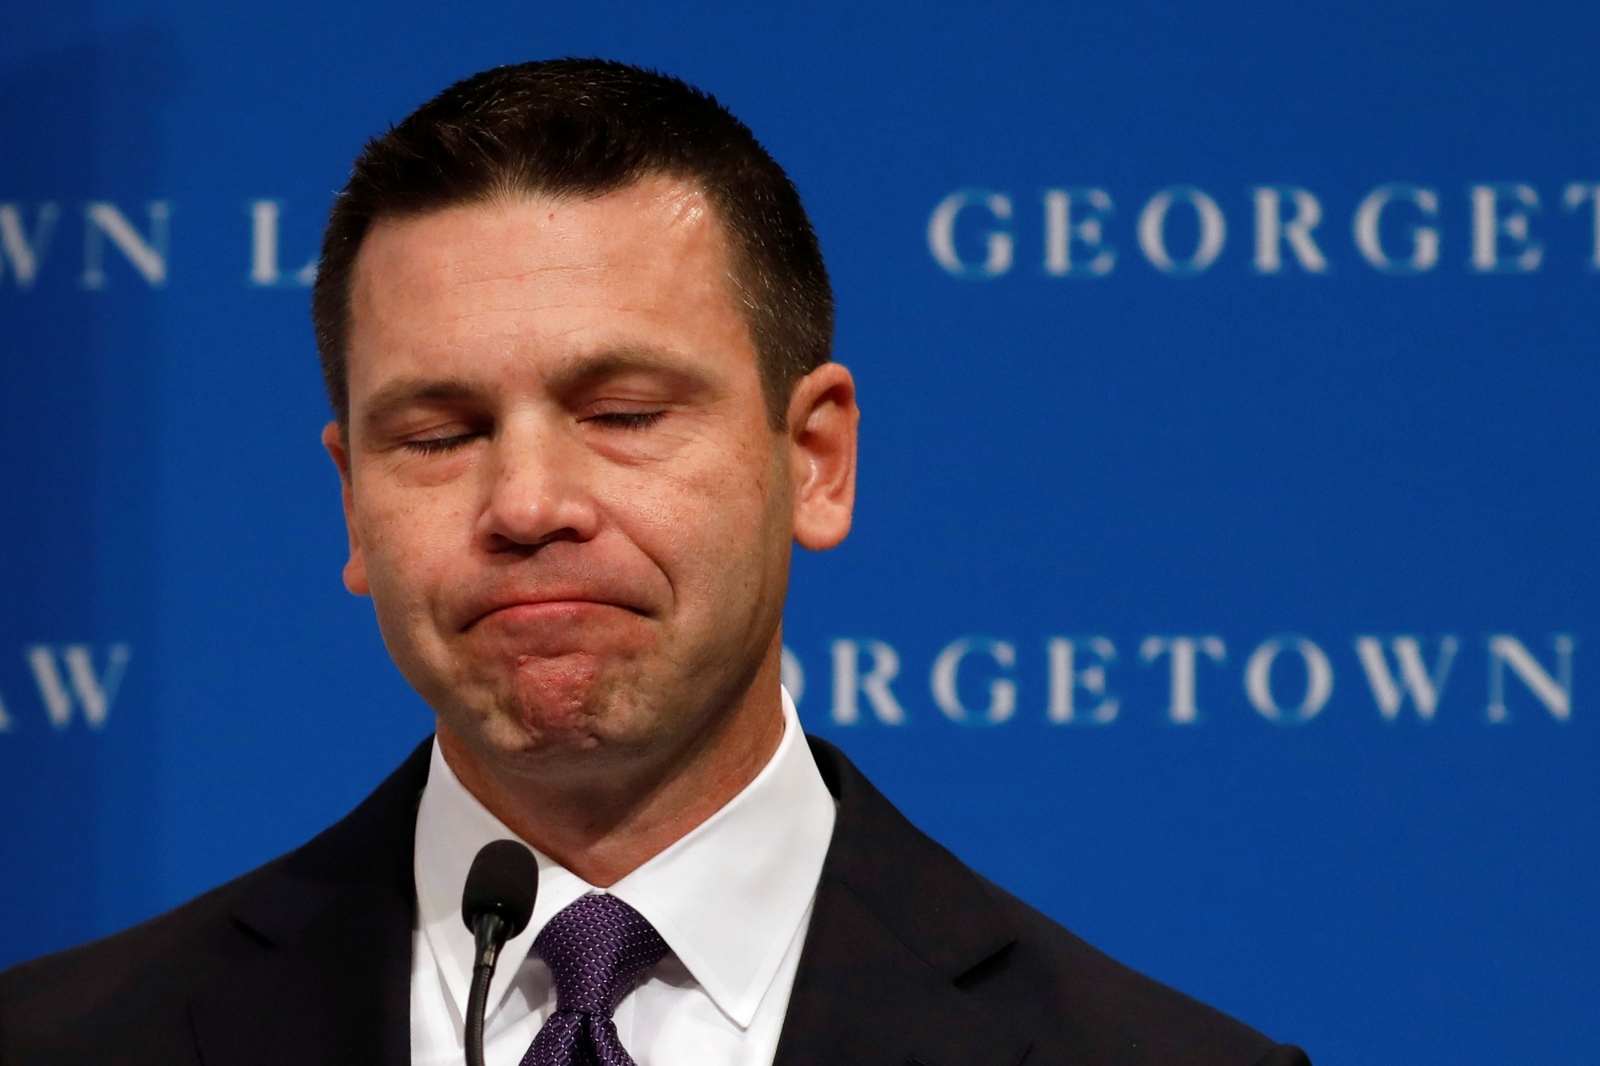 Acting DHS Secretary Kevin McAleenan attends the Migration Policy Institute annual Immigration Law and Policy Conference Acting Department of Homeland Security (DHS) Secretary Kevin McAleenan reacts while protesters interrupt his remarks at the Migration Policy Institute annual Immigration Law and Policy Conference in Washington, U.S., October 7, 2019. REUTERS/Yuri Gripas YURI GRIPAS